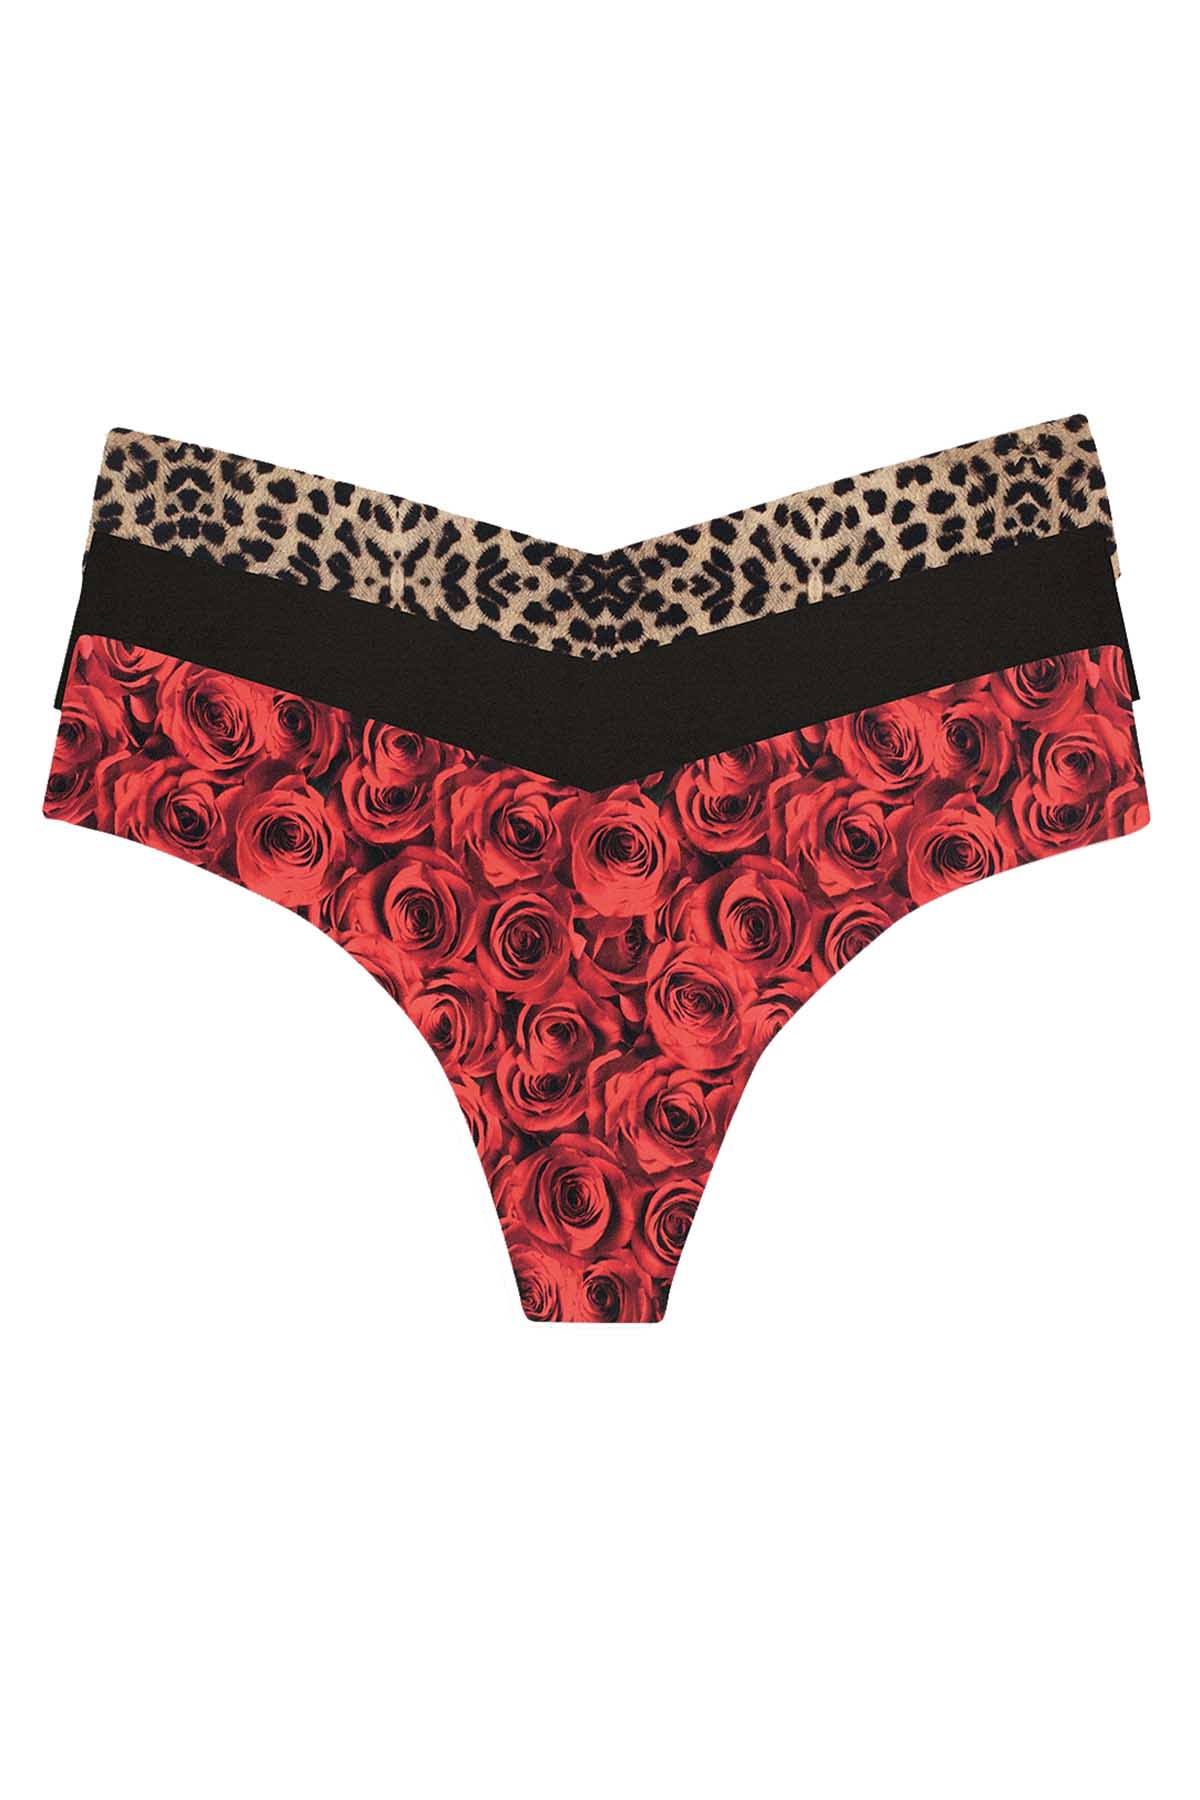 Commando Red/Black/Animal Classic Thong 3-Pack